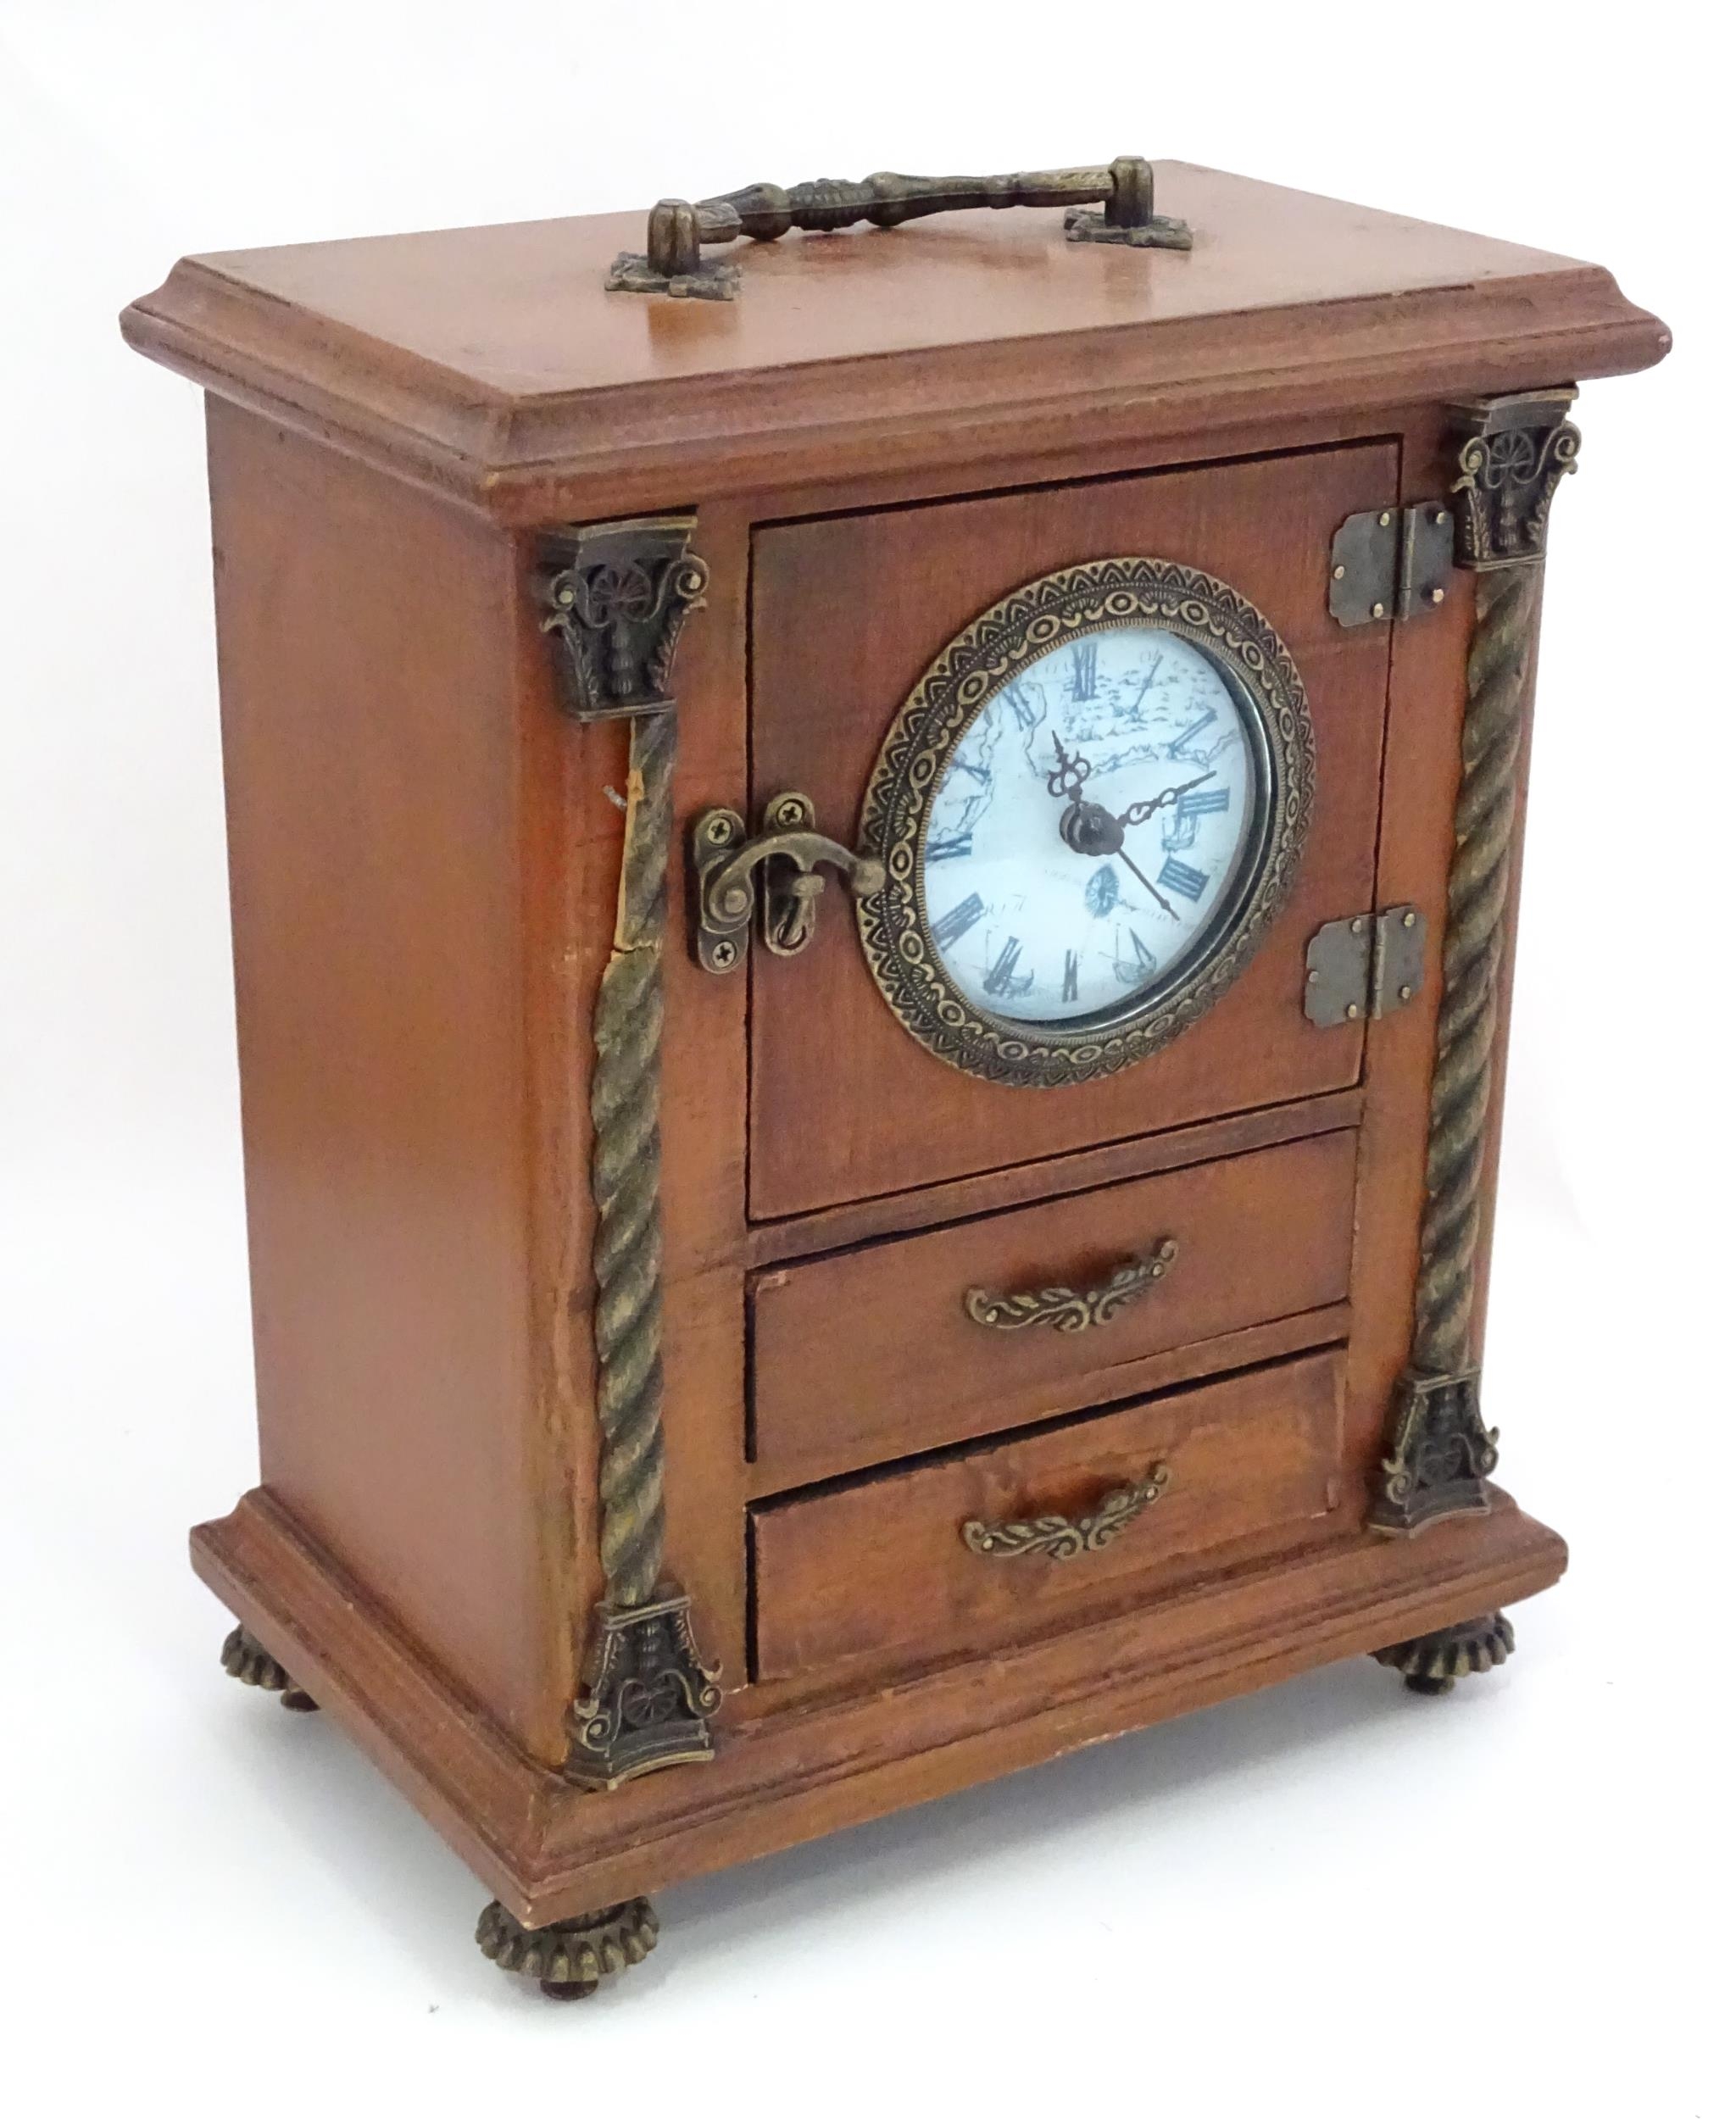 Jewellery box formed as a mantle clock Please Note - we do not make reference to the condition of